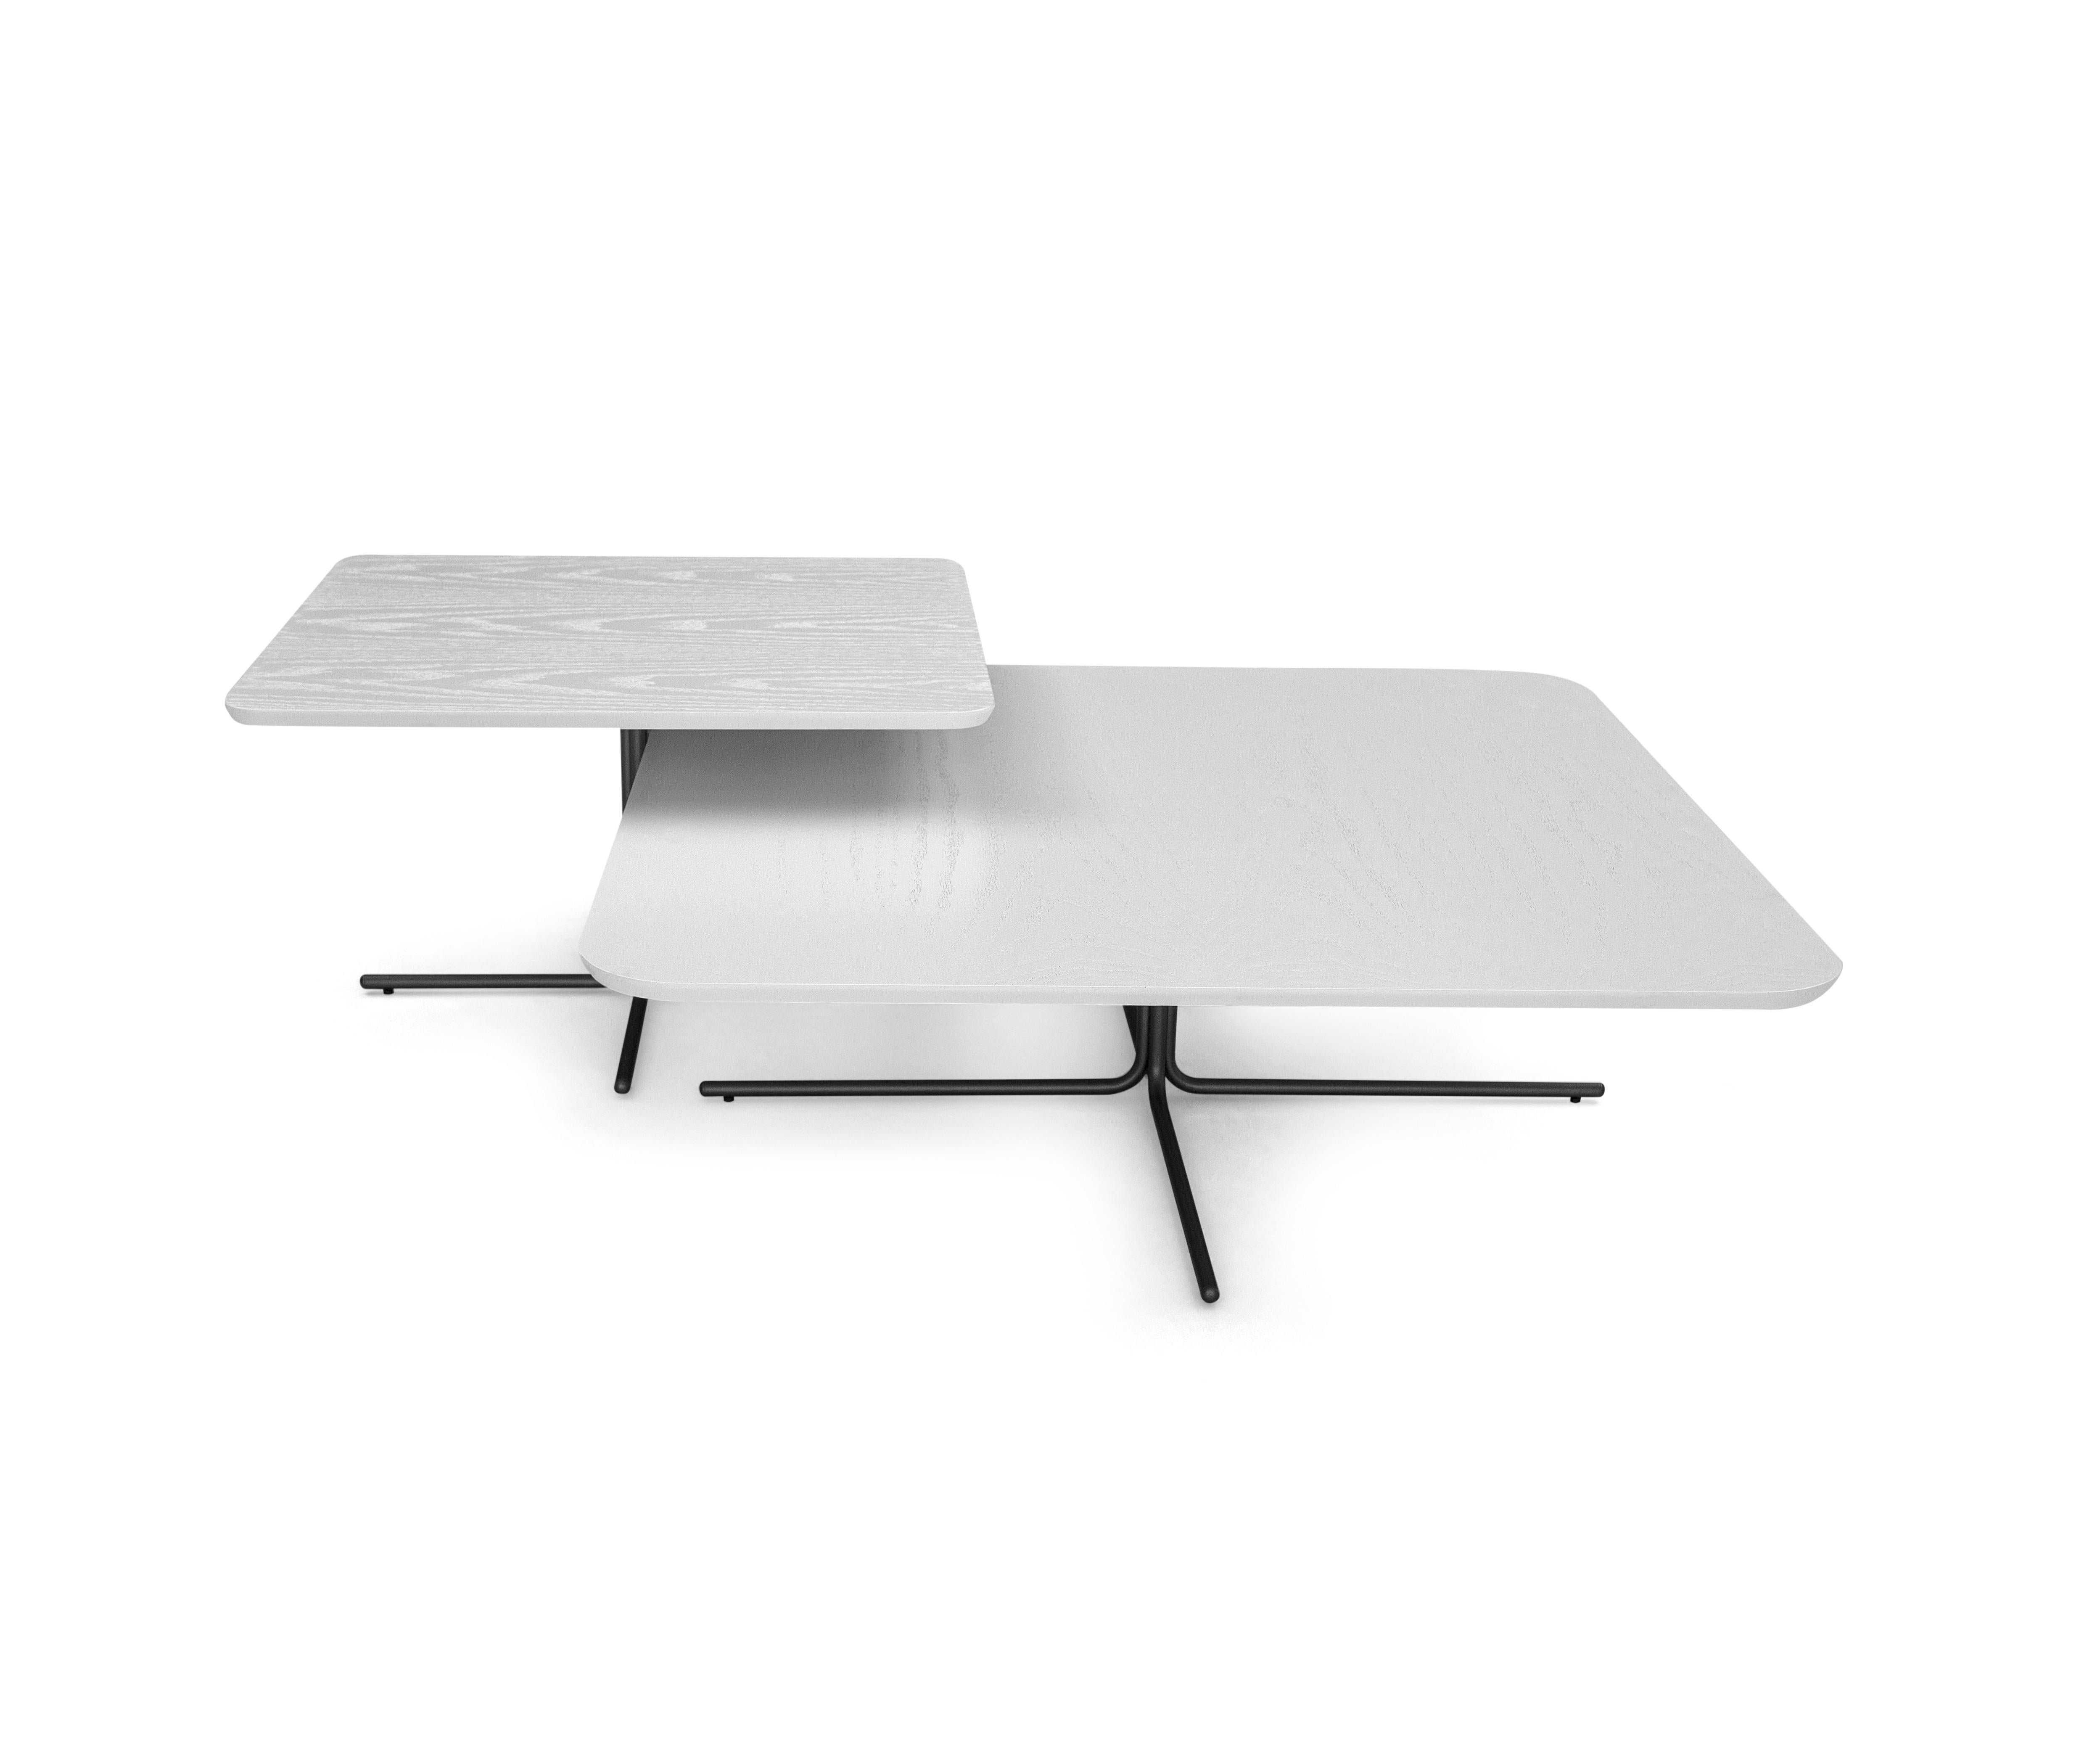 Plato Coffee Table in White Oak Wood and Graphite Finish, Individual For Sale 1